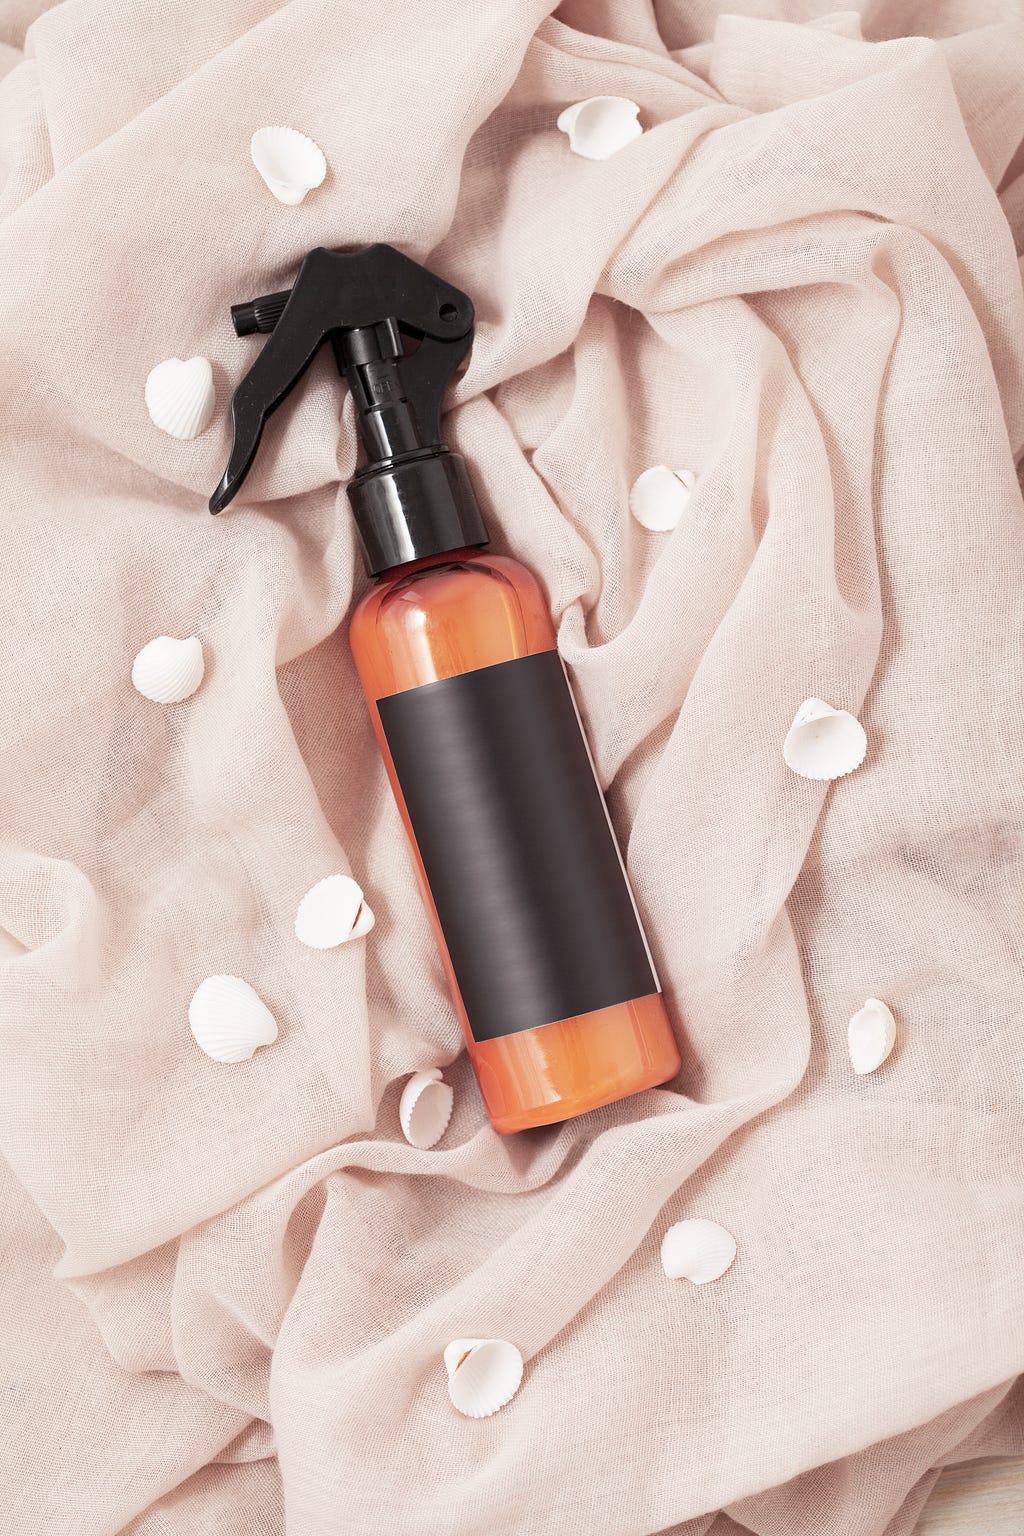 Spritz your clothes with a fabric freshener to be as good as new!